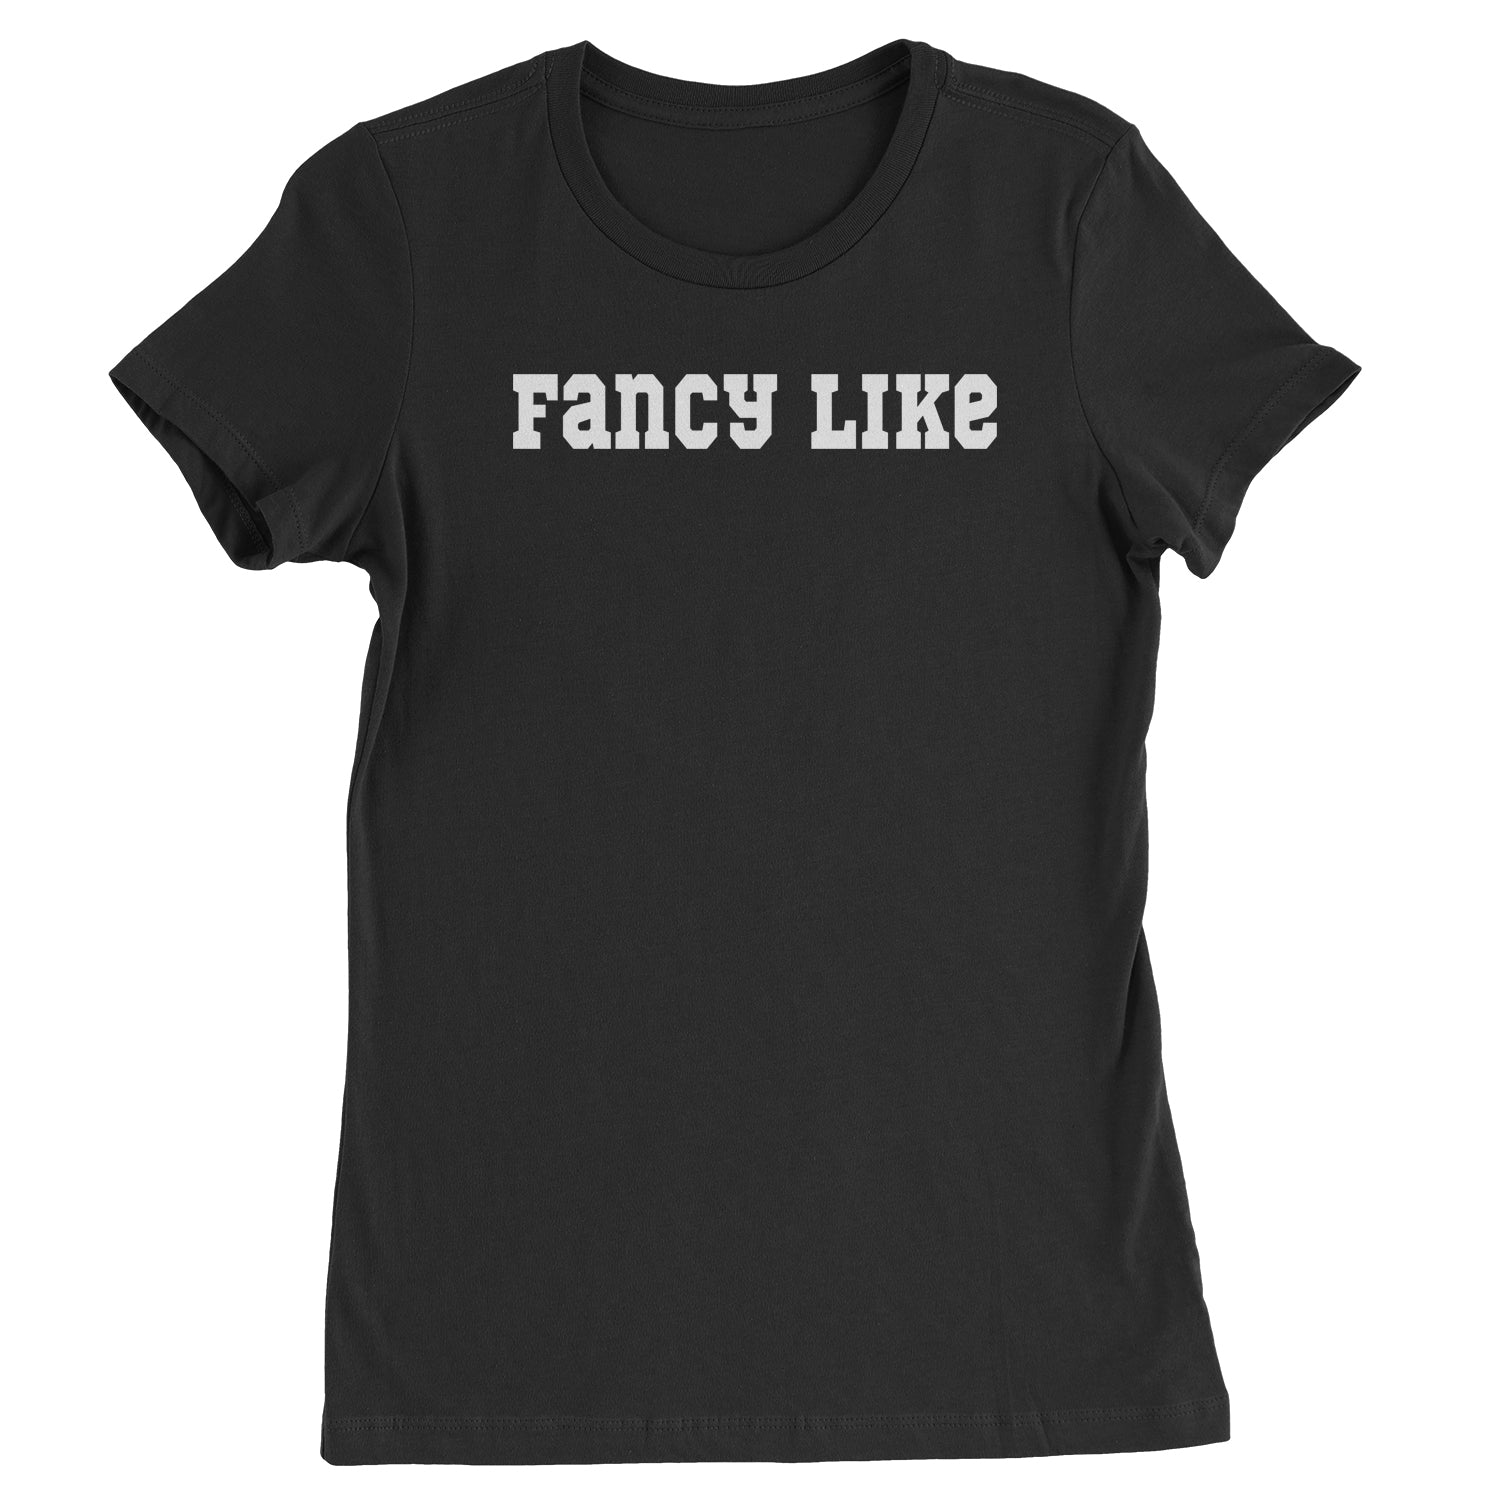 Fancy Like Womens T-shirt hayes, walter by Expression Tees